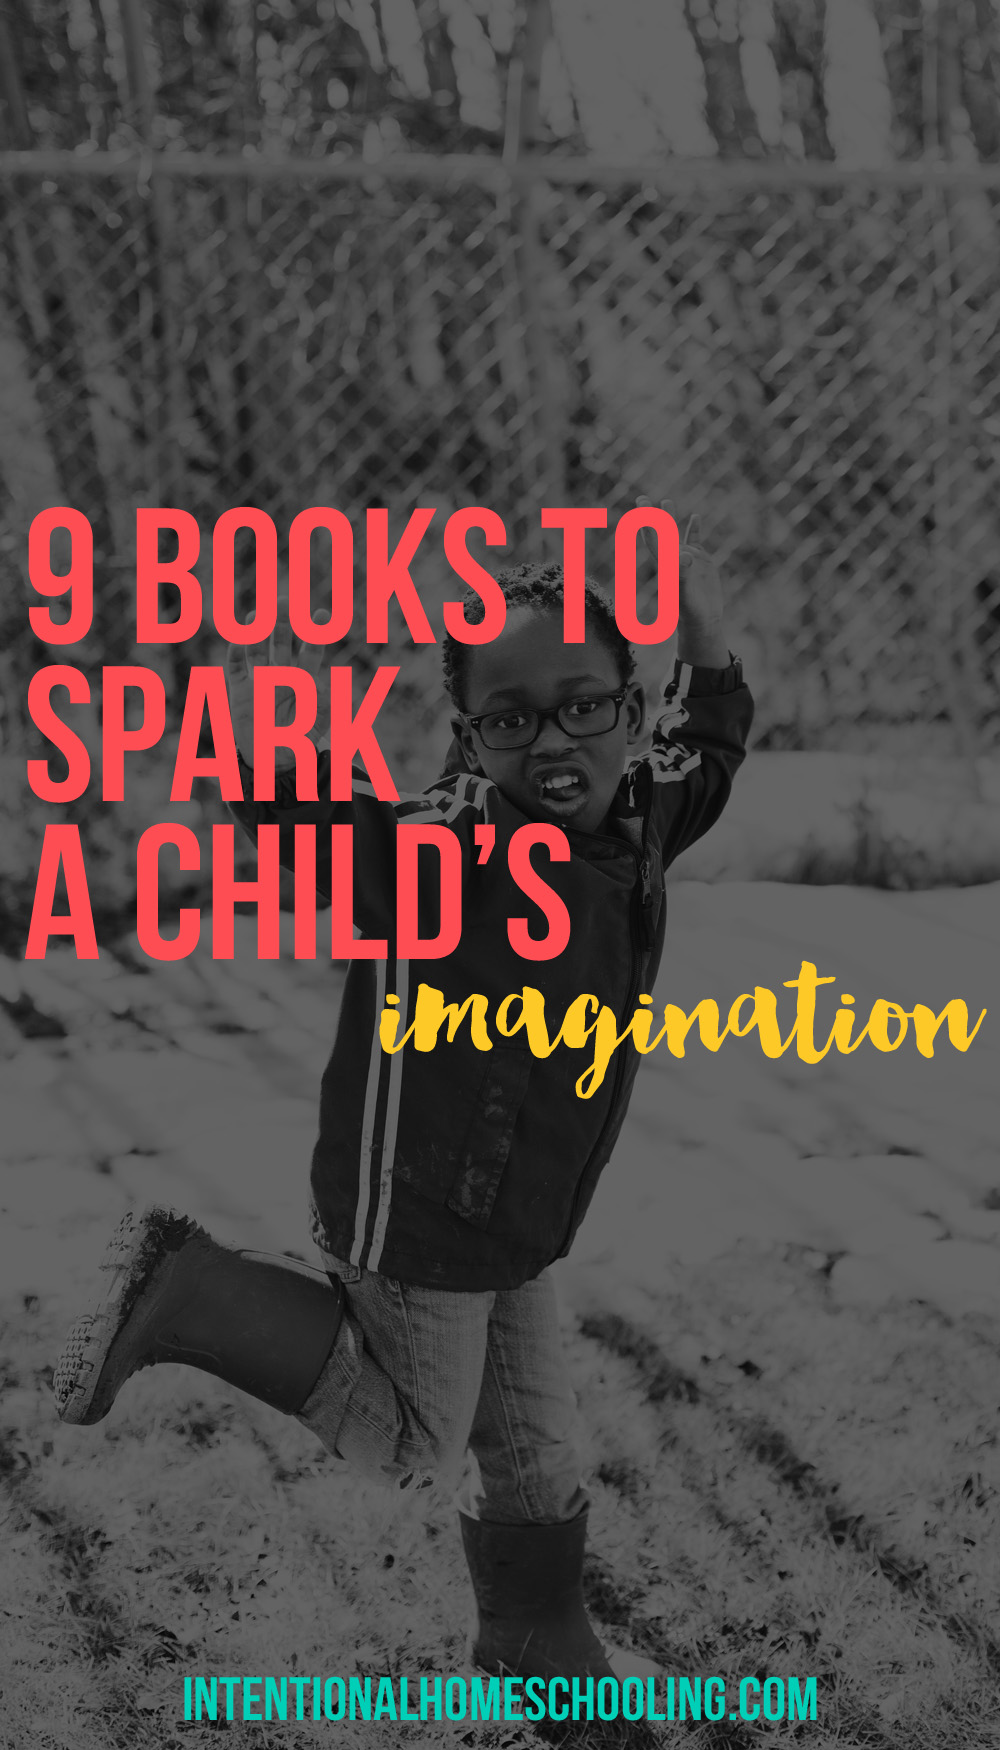 9 books with characters with great imagination that will help spark imagination in children.